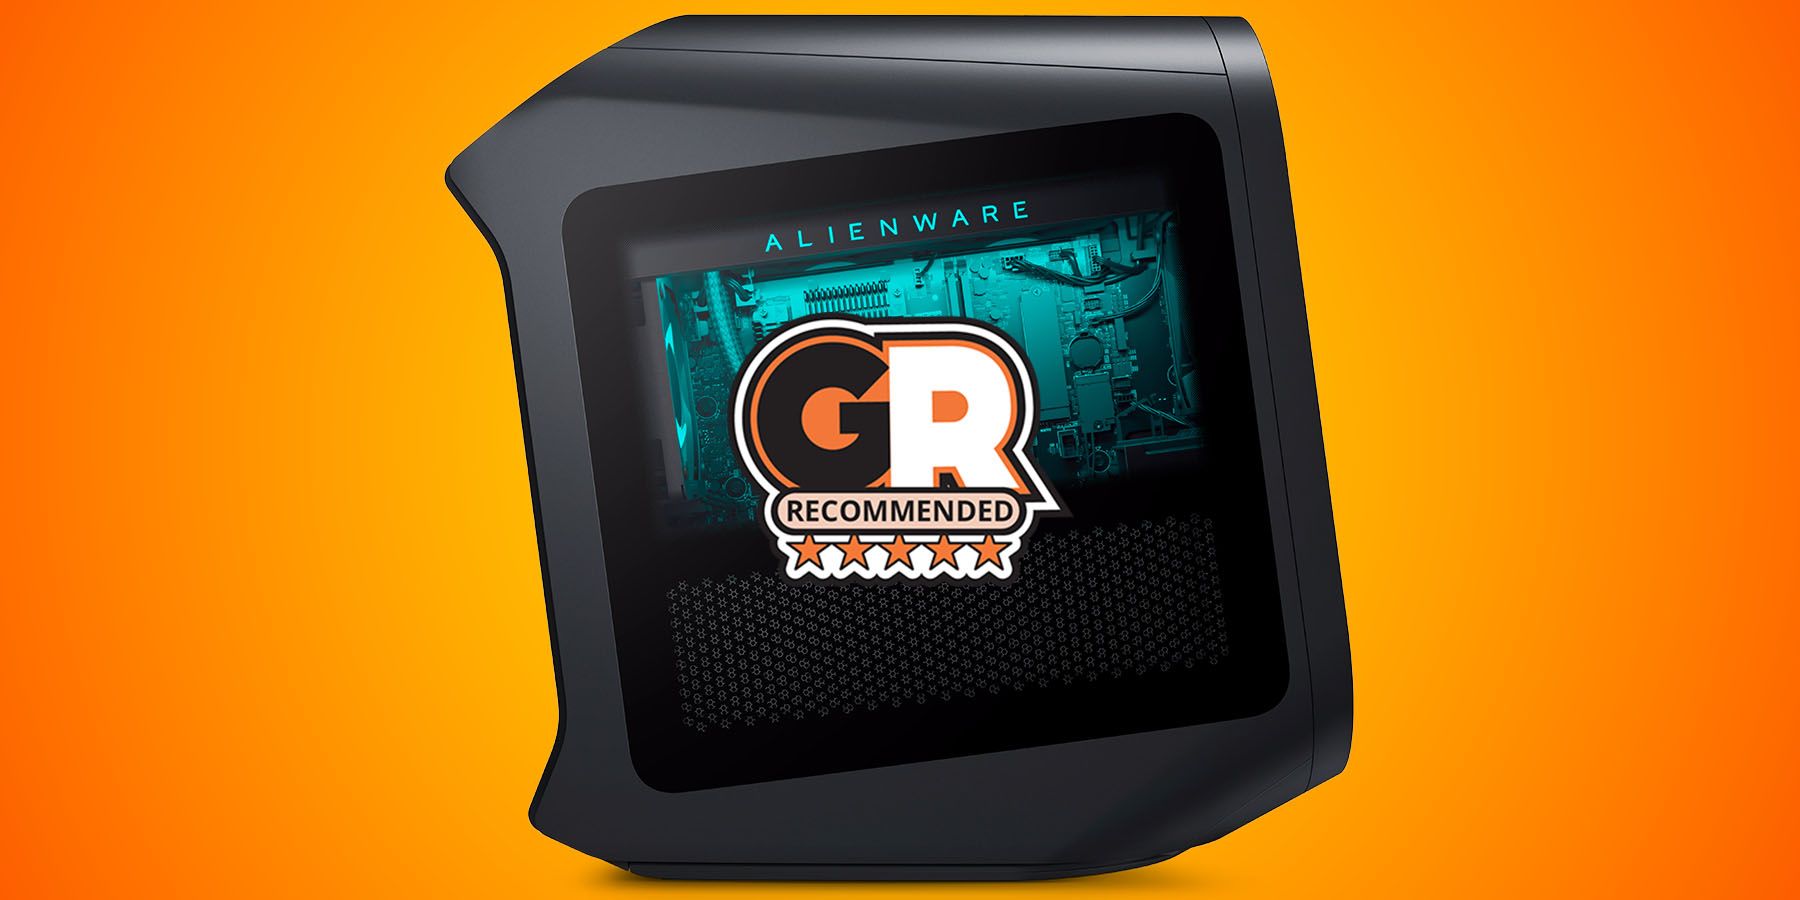 Best Alienware PC for Gaming Thumb